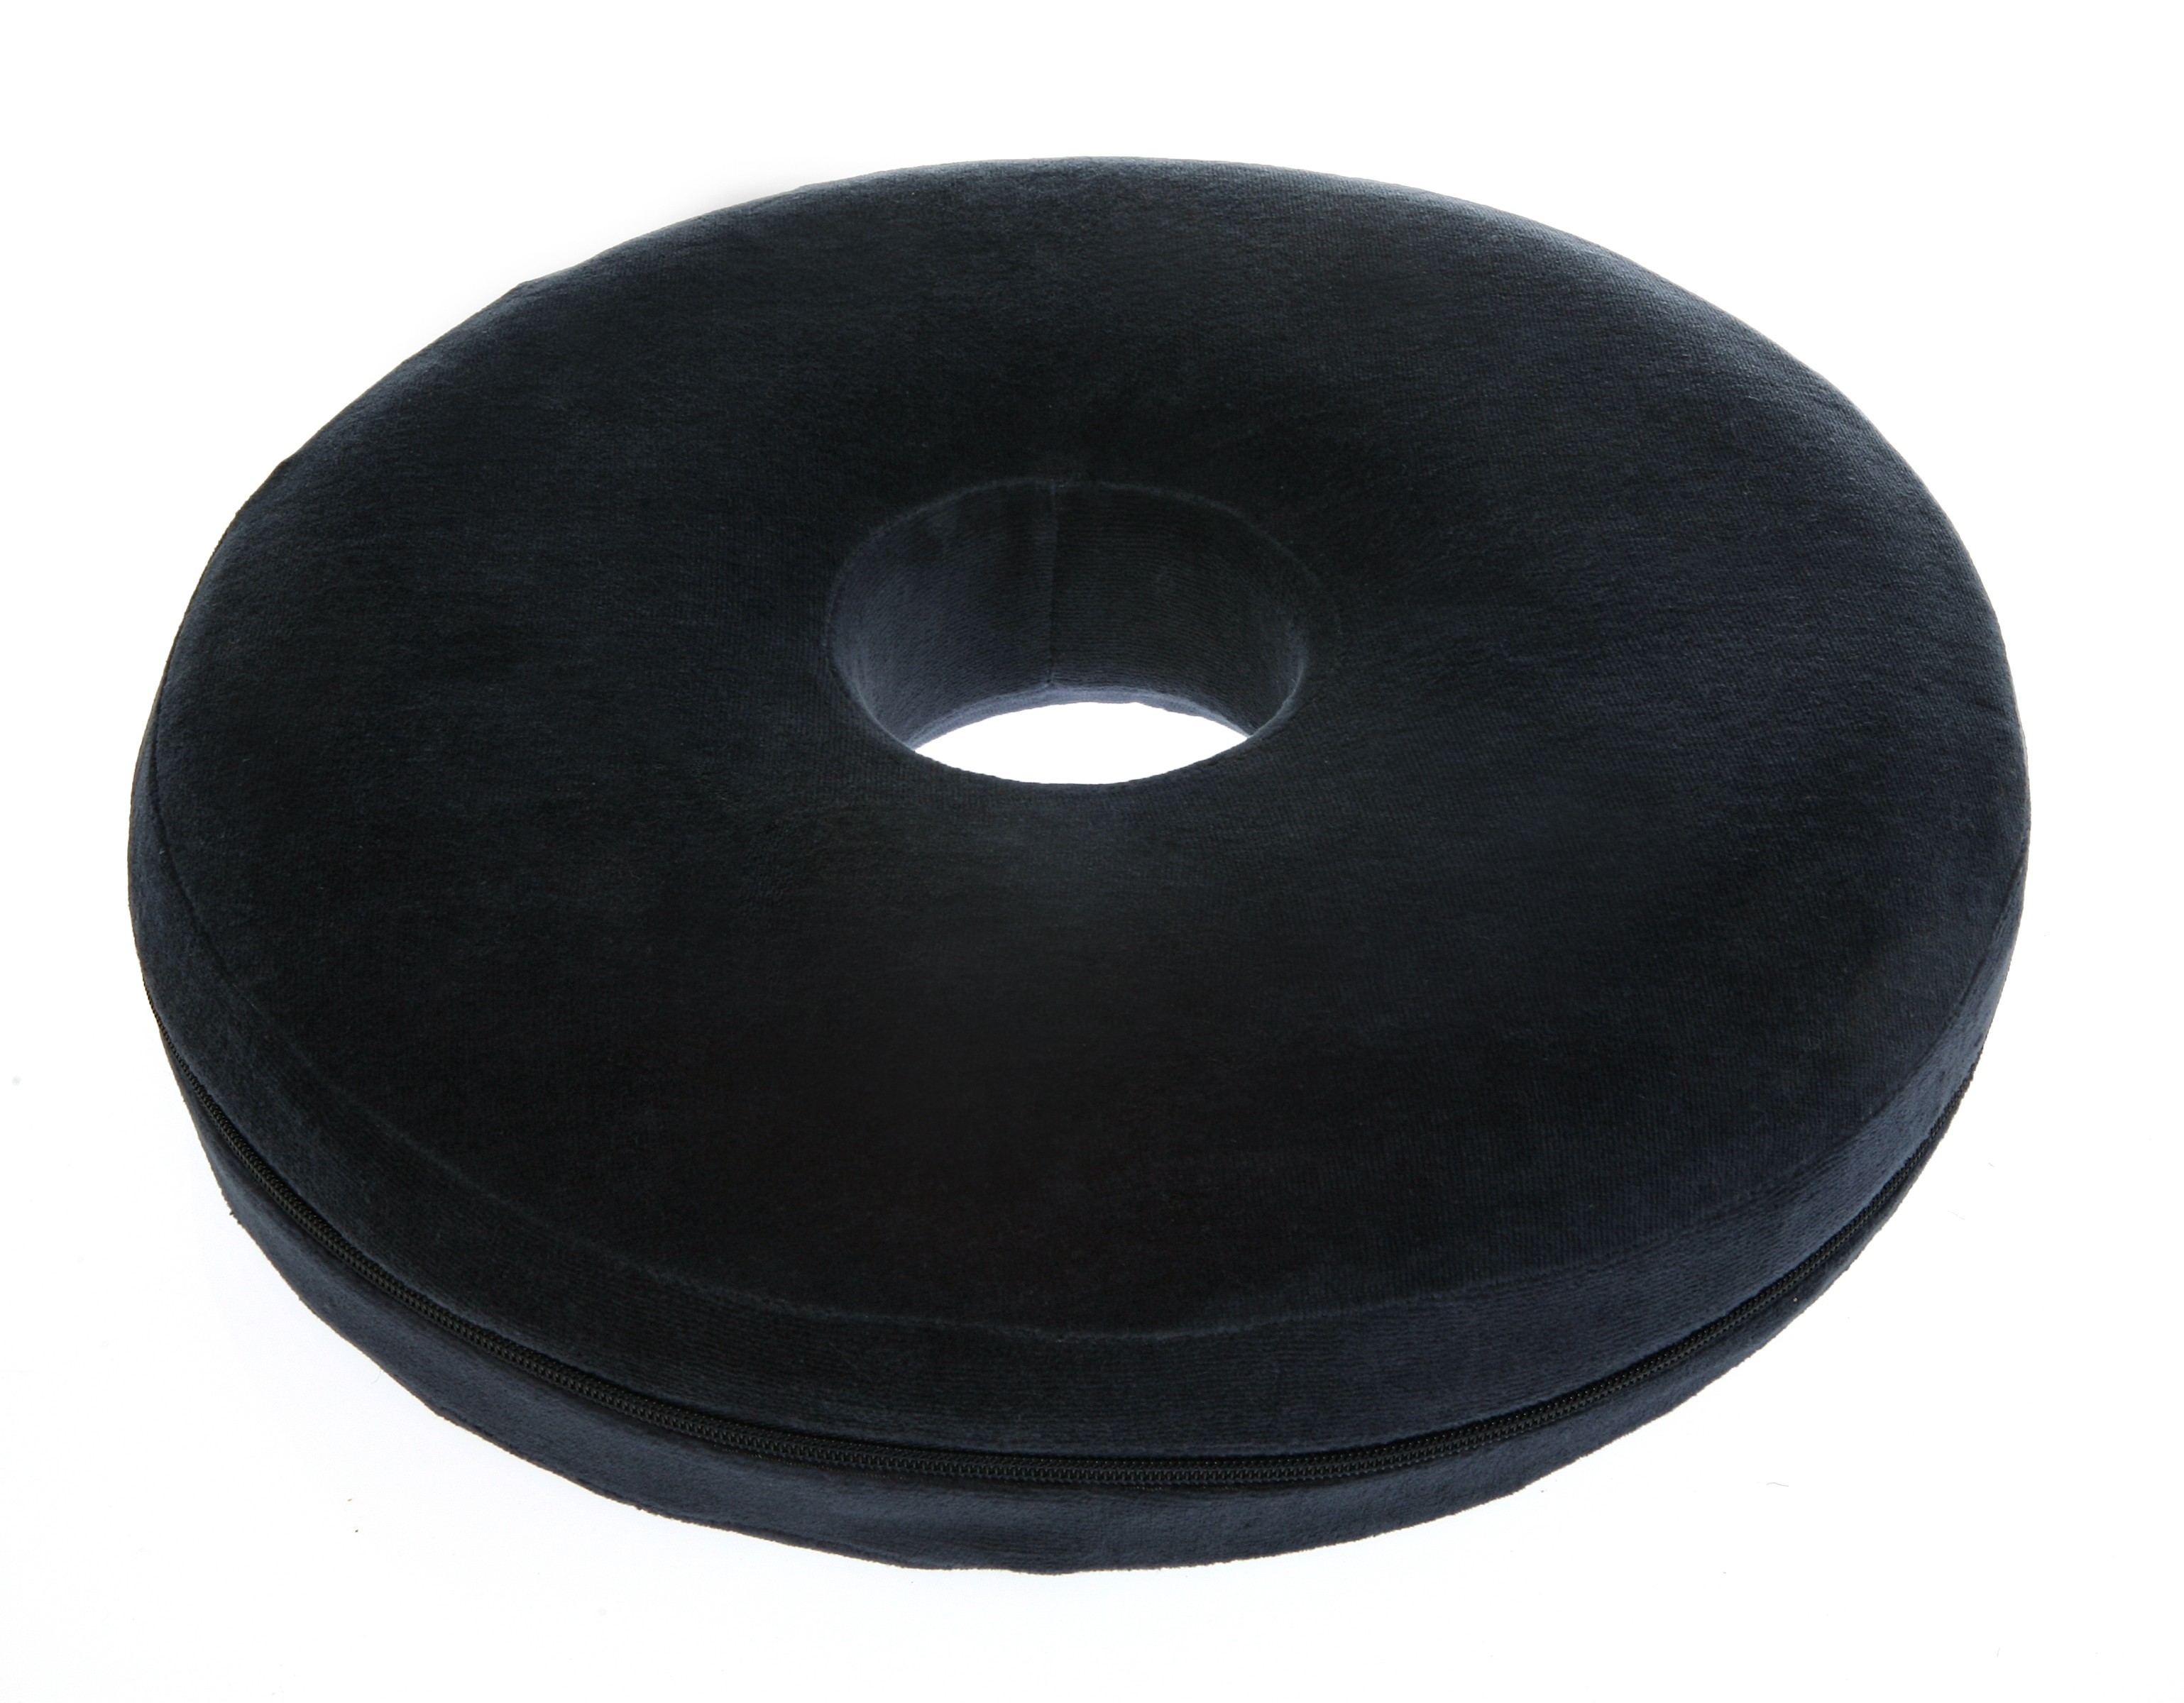 Donut Pillow - Best Ring Shaped Supportive Foam Pillows -  Relief of Lower Back and Hemorrhoid Pain